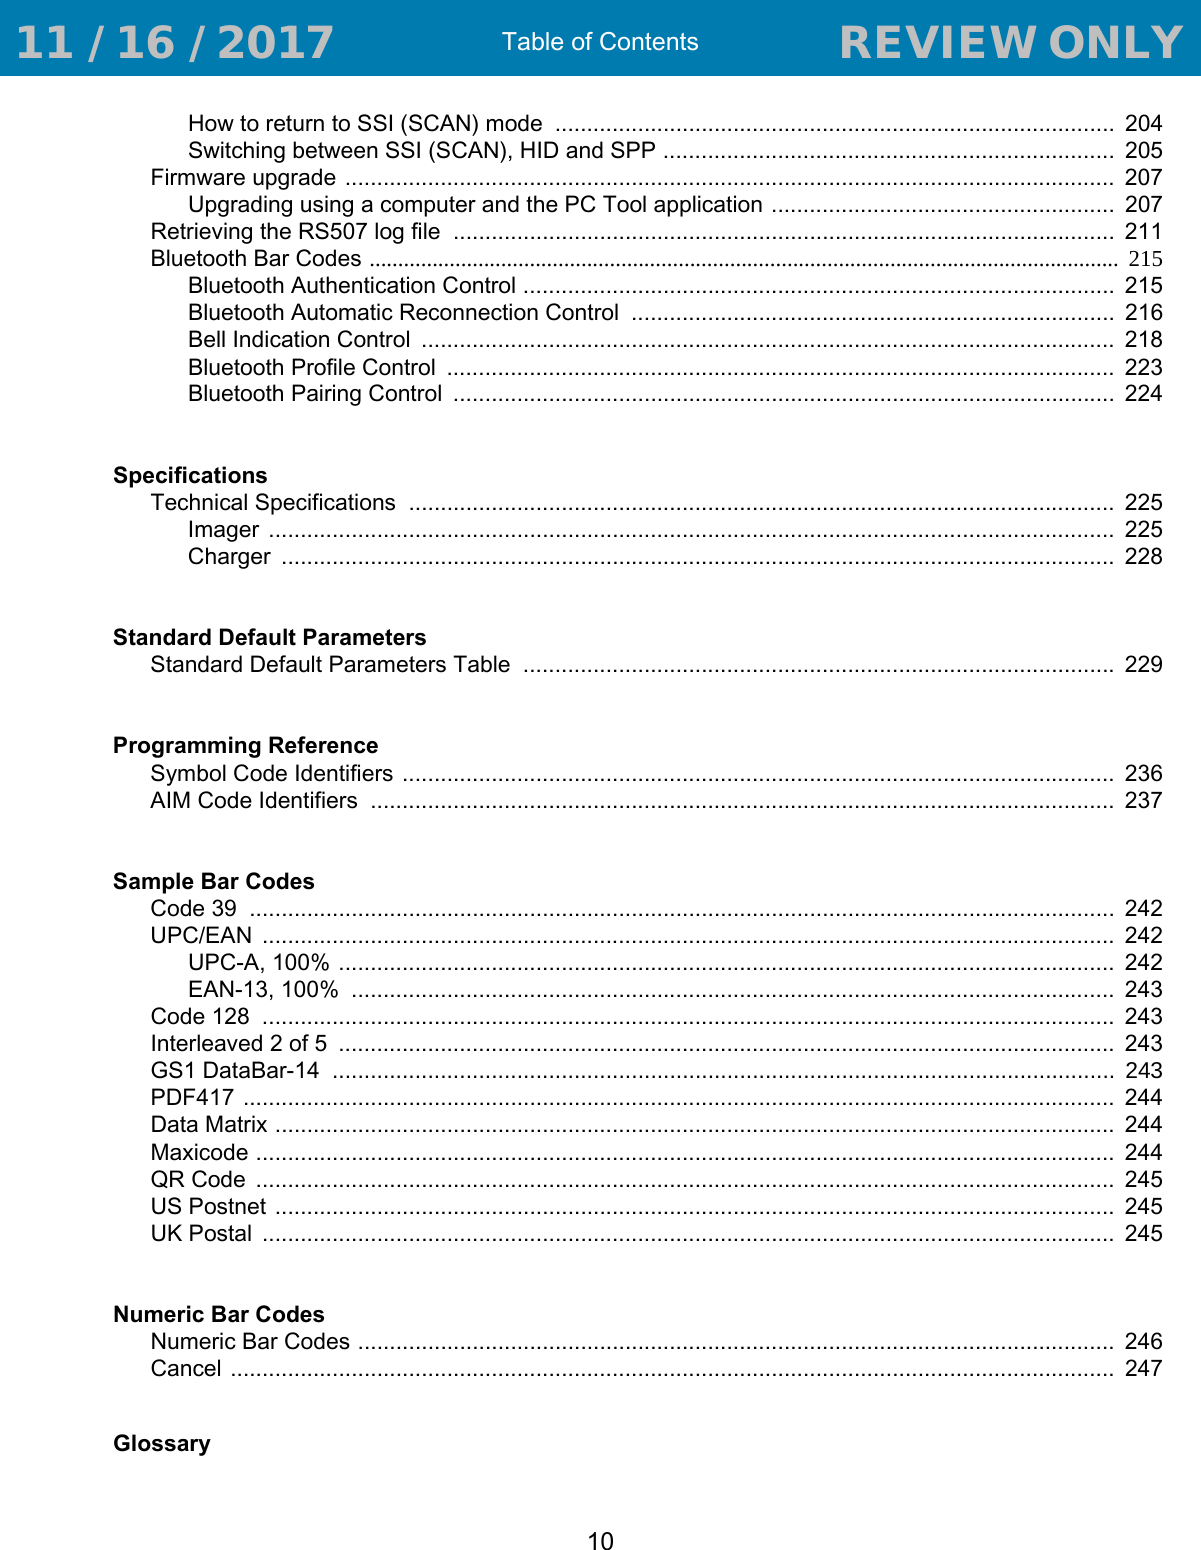 Table of Contents10How to return to SSI (SCAN) mode  ........................................................................................  204Switching between SSI (SCAN), HID and SPP .......................................................................  205Firmware upgrade .........................................................................................................................  207Upgrading using a computer and the PC Tool application ......................................................  207Retrieving the RS507 log file  ........................................................................................................  211Bluetooth Bar Codes ...................................................................................................................................  215Bluetooth Authentication Control .............................................................................................  215Bluetooth Automatic Reconnection Control  ............................................................................  216Bell Indication Control  .............................................................................................................  218Bluetooth Profile Control  .........................................................................................................  223Bluetooth Pairing Control  ........................................................................................................  224SpecificationsTechnical Specifications  ...............................................................................................................  225Imager  .....................................................................................................................................  225Charger  ...................................................................................................................................  228Standard Default ParametersStandard Default Parameters Table  ............................................................................................. 229Programming ReferenceSymbol Code Identifiers ................................................................................................................  236AIM Code Identifiers  .....................................................................................................................  237Sample Bar CodesCode 39  ........................................................................................................................................  242UPC/EAN  ......................................................................................................................................  242UPC-A, 100% ..........................................................................................................................  242EAN-13, 100%  ........................................................................................................................  243Code 128  ......................................................................................................................................  243Interleaved 2 of 5  ..........................................................................................................................  243GS1 DataBar-14 ........................................................................................................................... 243PDF417 .........................................................................................................................................  244Data Matrix ....................................................................................................................................  244Maxicode .......................................................................................................................................  244QR Code  .......................................................................................................................................  245US Postnet ....................................................................................................................................  245UK Postal  ......................................................................................................................................  245Numeric Bar CodesNumeric Bar Codes .......................................................................................................................  246Cancel ...........................................................................................................................................  247Glossary 11 / 16 / 2017                                  REVIEW ONLY                             REVIEW ONLY - REVIEW ONLY - REVIEW ONLY